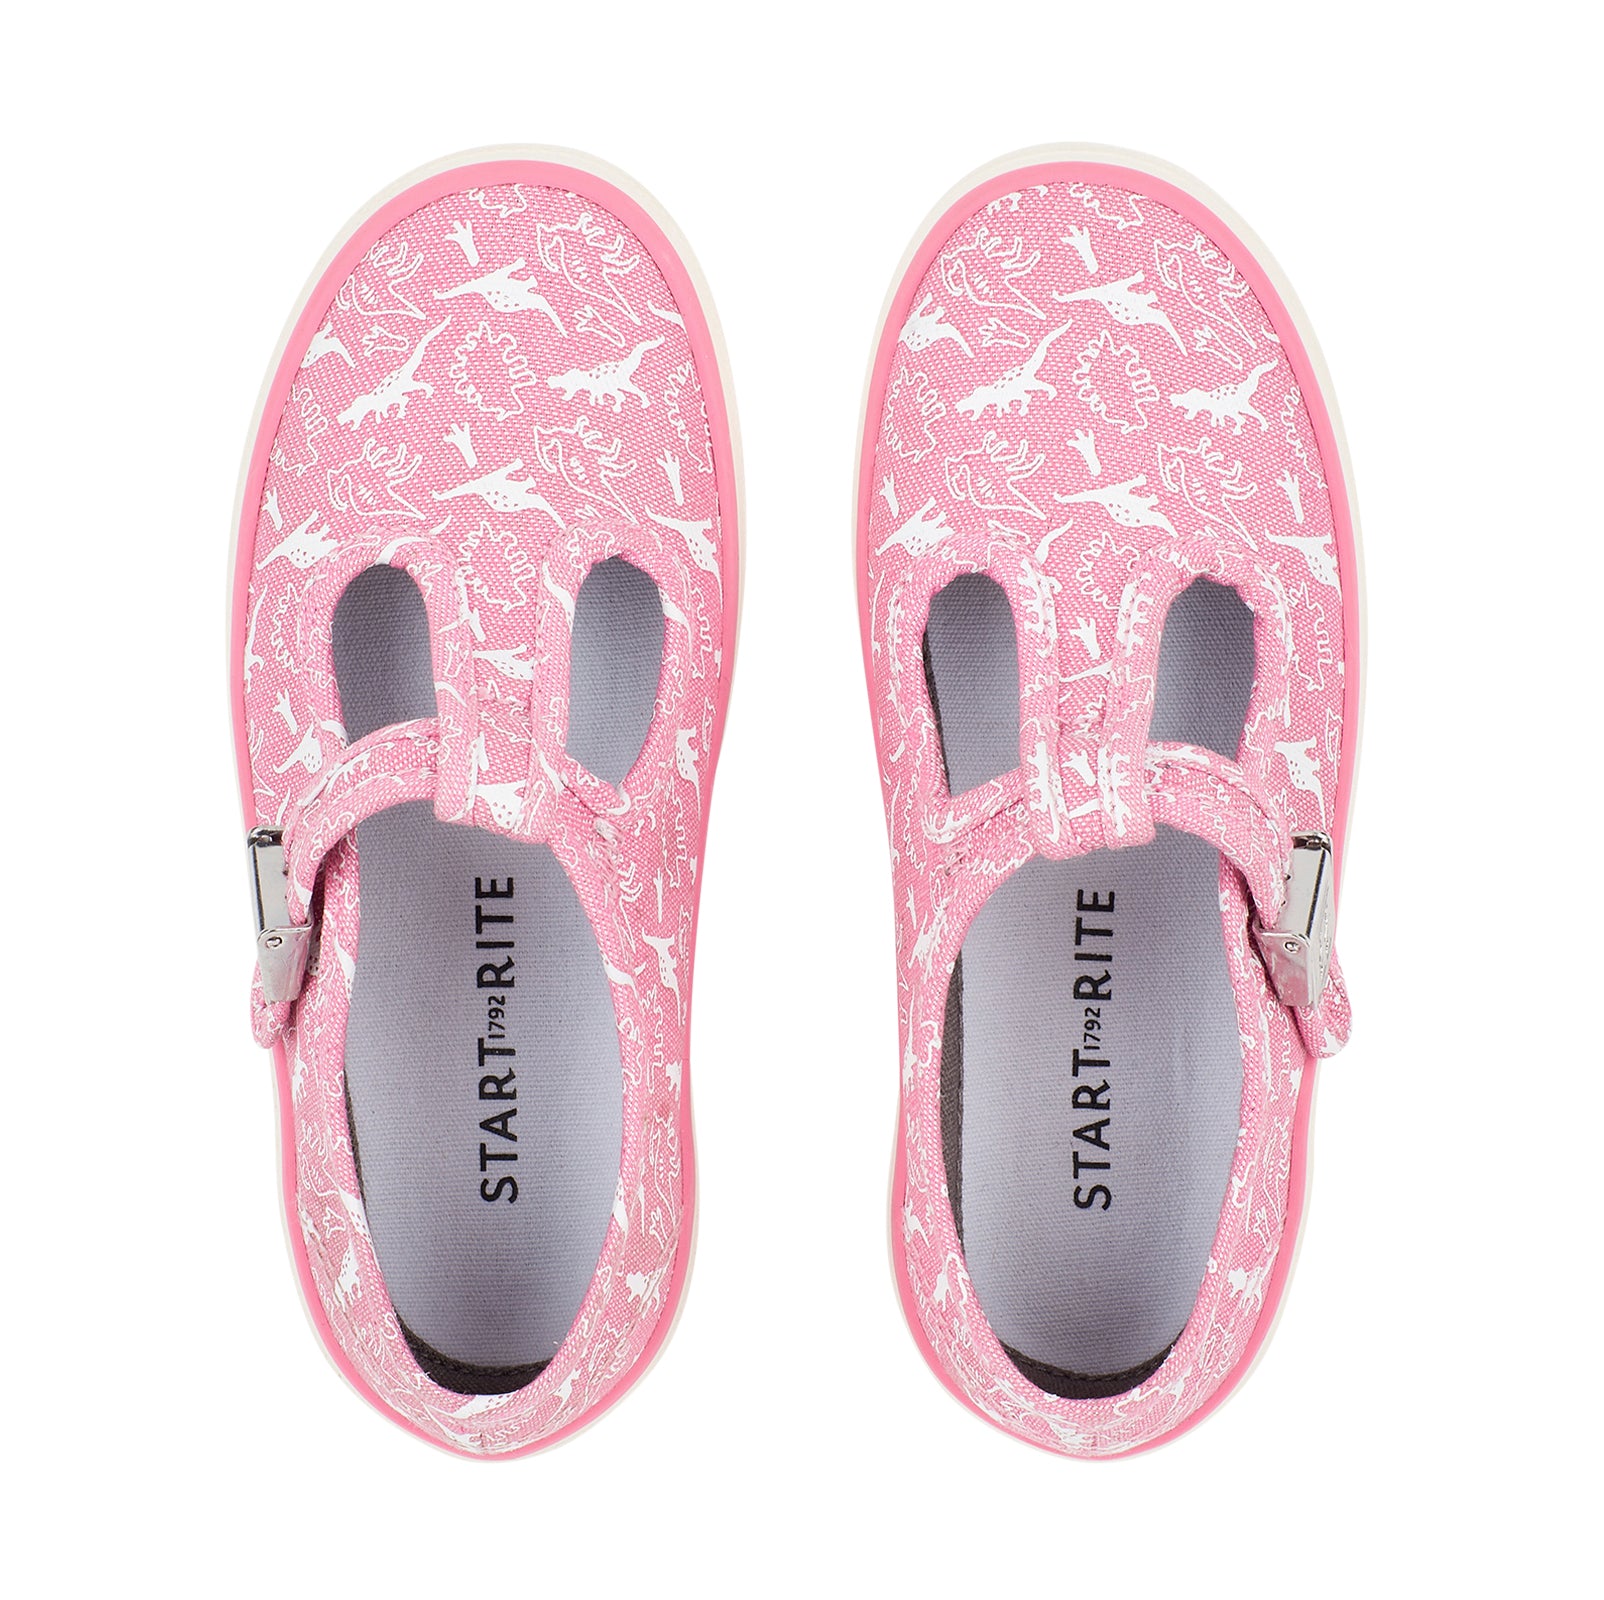 Start-Rite Fossil 6181_6 Girls Pink Dino Canvas Shoes